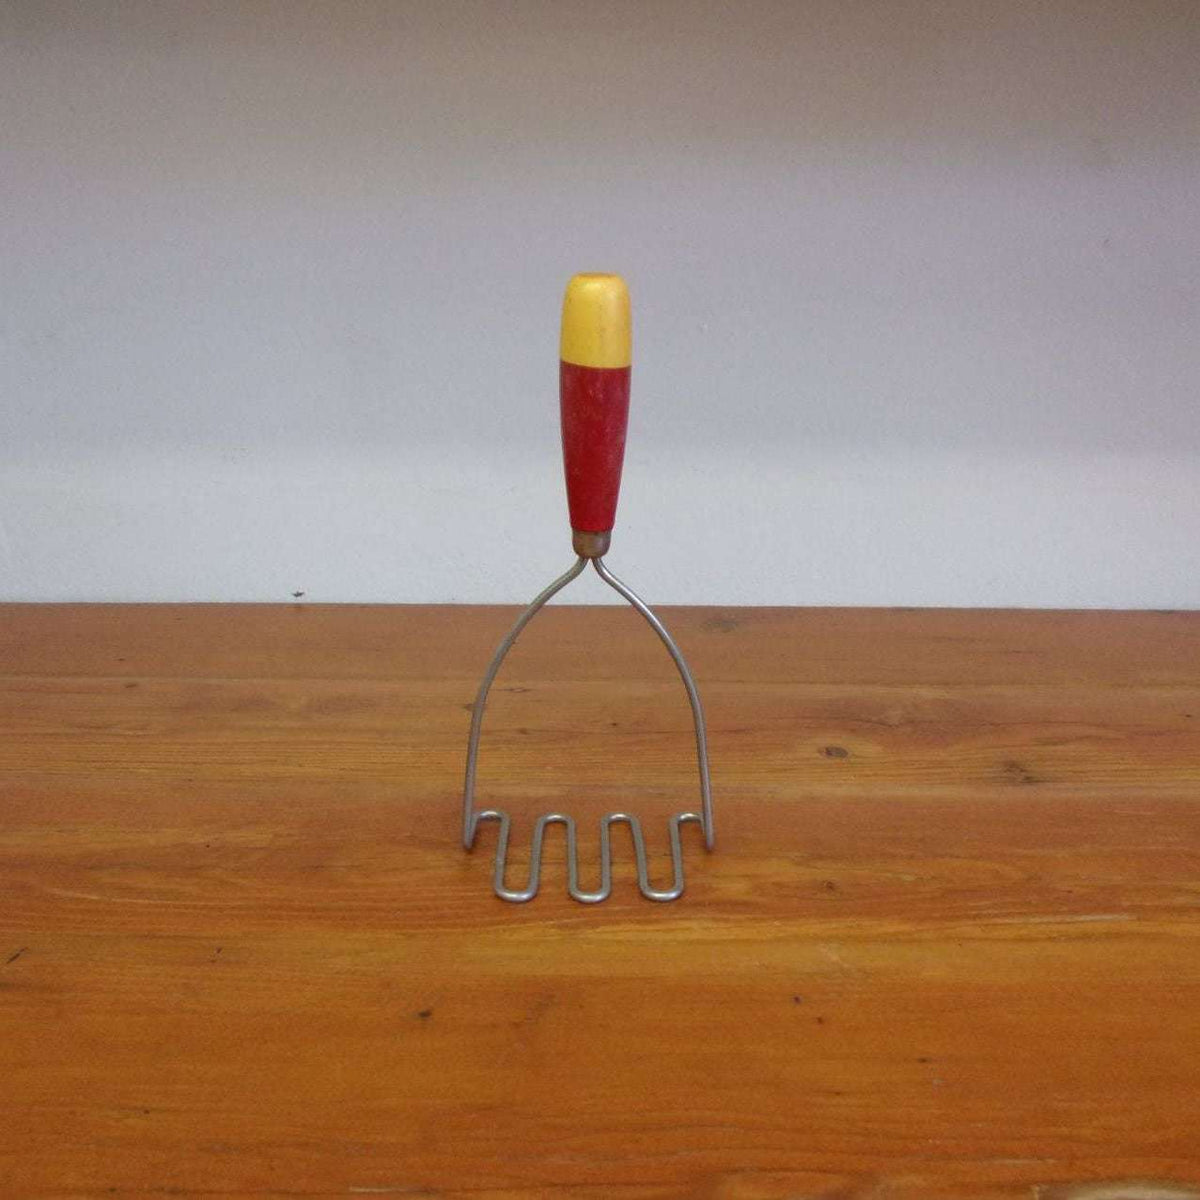 http://maandpasattic.com/cdn/shop/files/antique-vintage-potato-masher-with-red-with-white-handle-kitchen-tools-gadgets-ma-and-pas-attic-32293013_1200x1200.jpg?v=1683068940